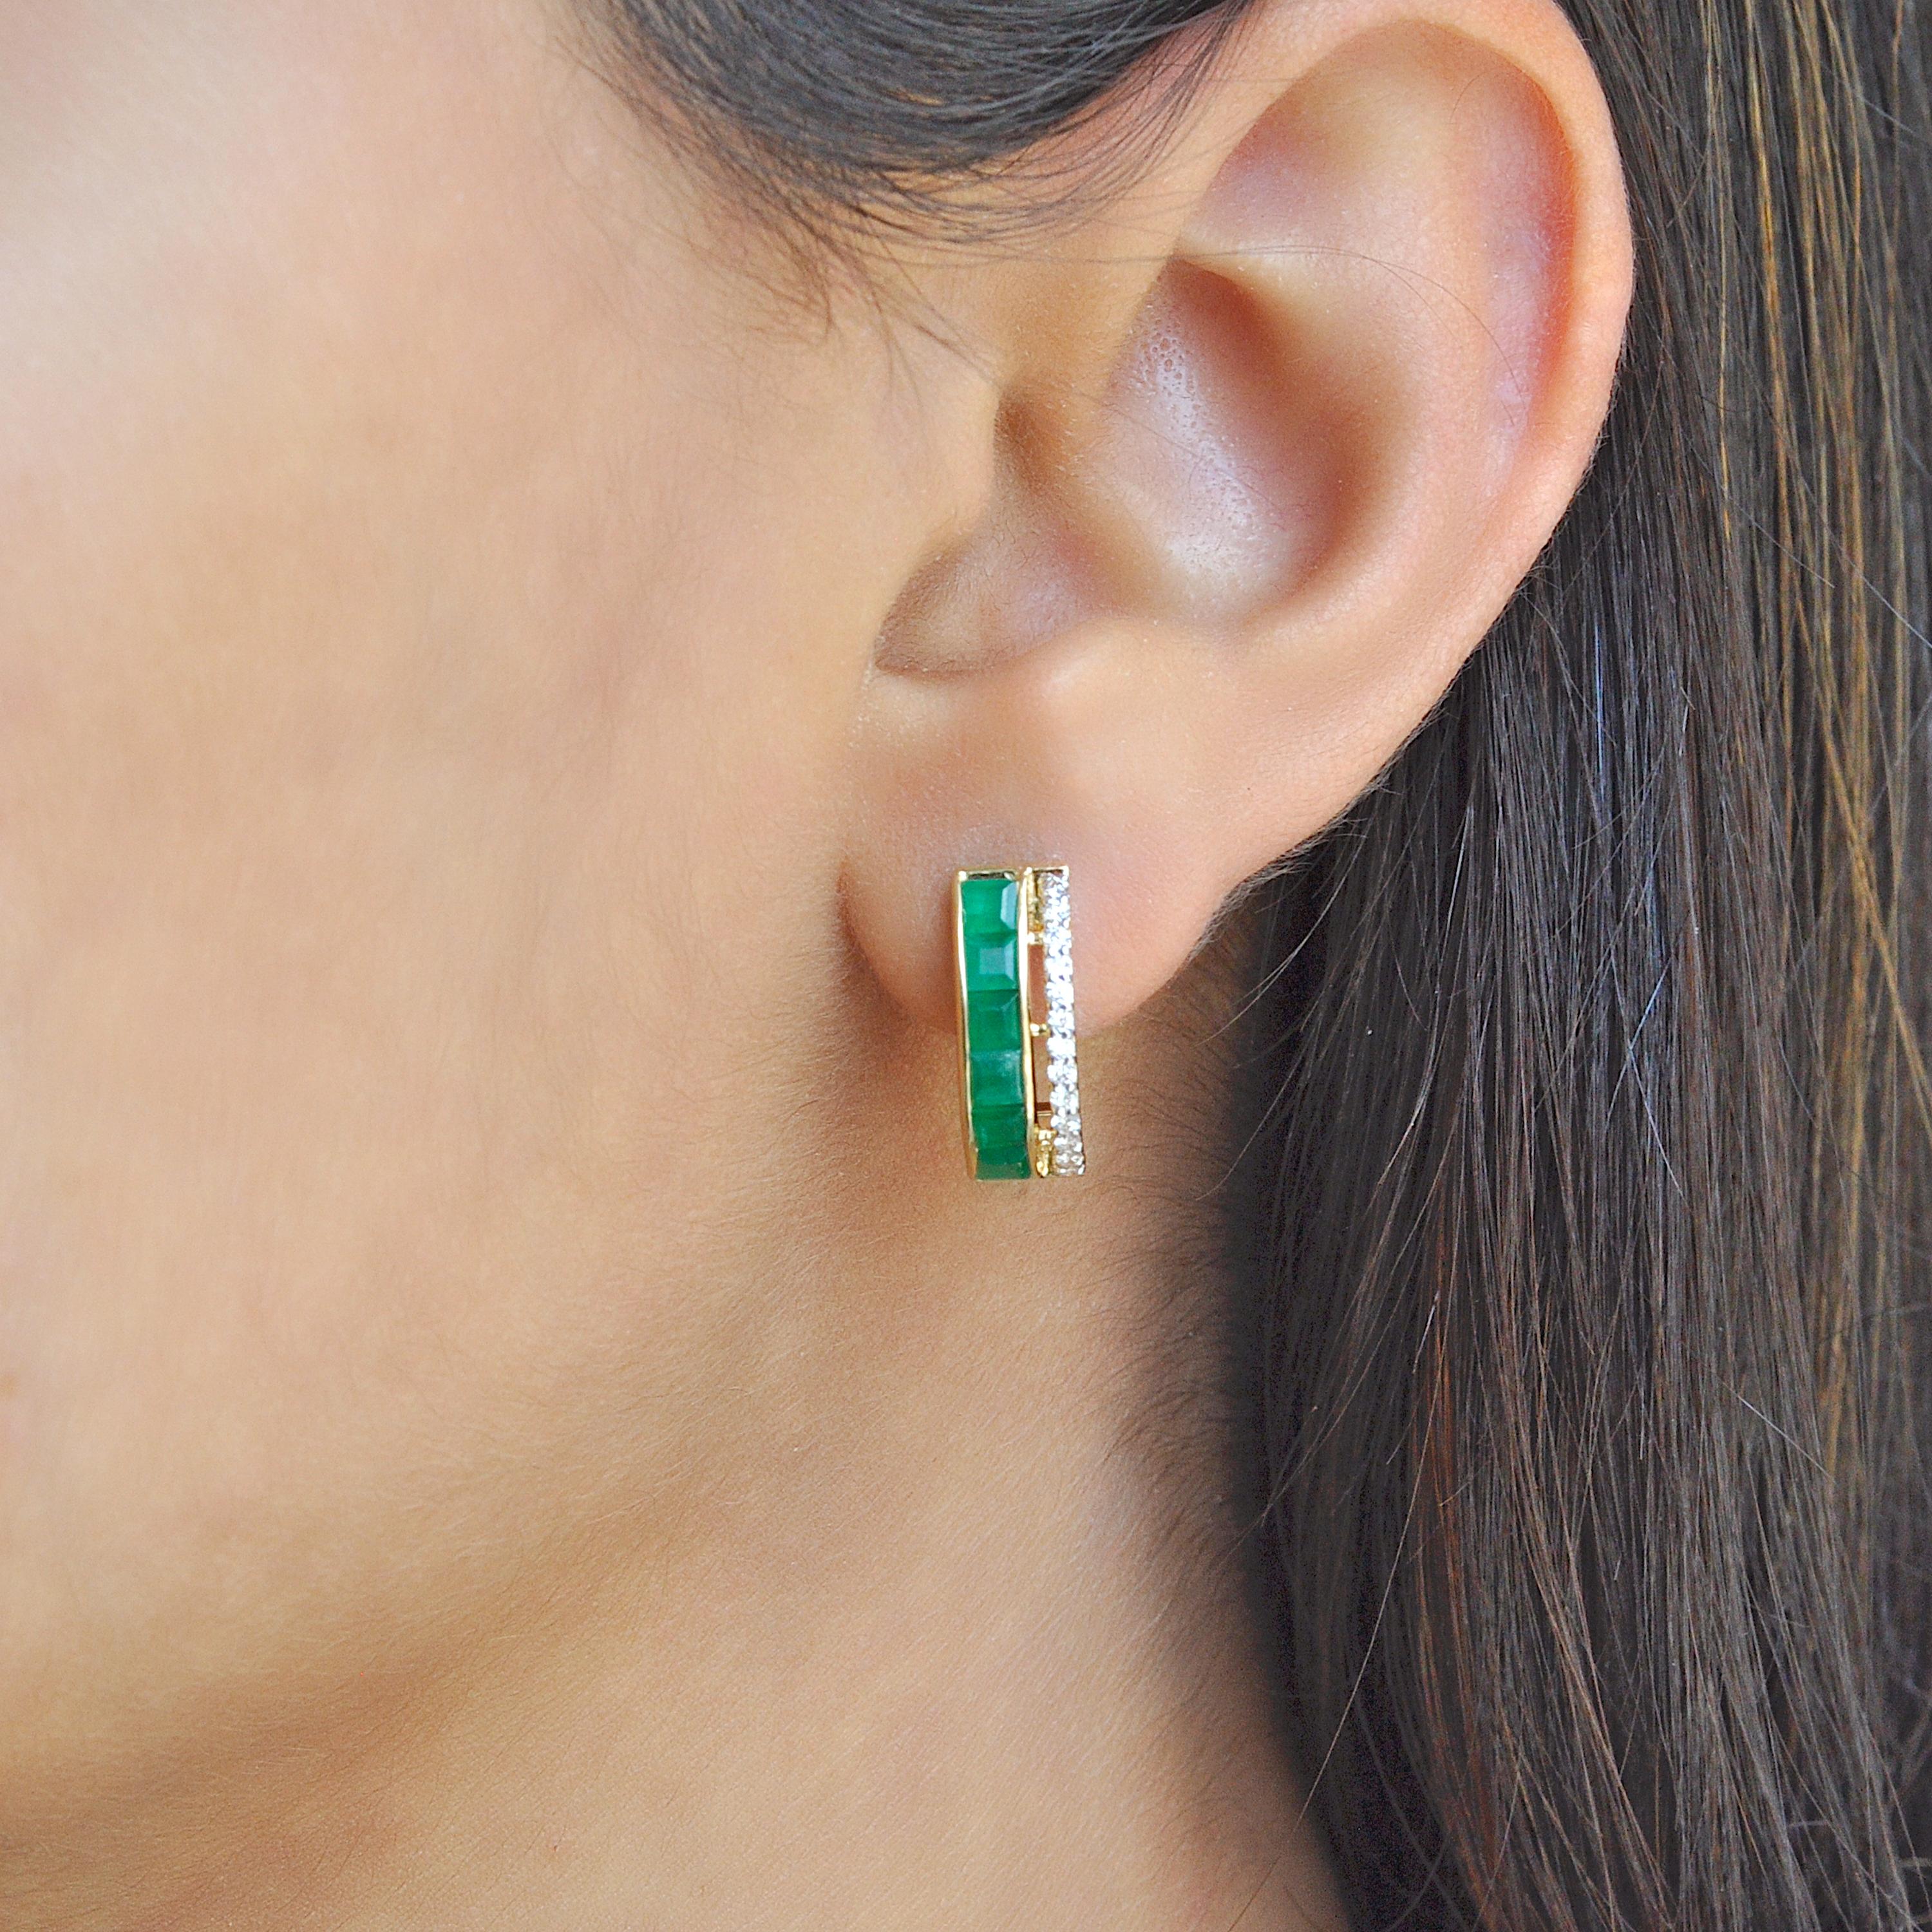 18 karat yellow gold 3mm square channel set brazilian emerald diamond hoop earrings.

Step into the world of opulence with our 18K gold 3mm emerald channel-set diamond hoop earrings, a testament to timeless elegance and refined sophistication.